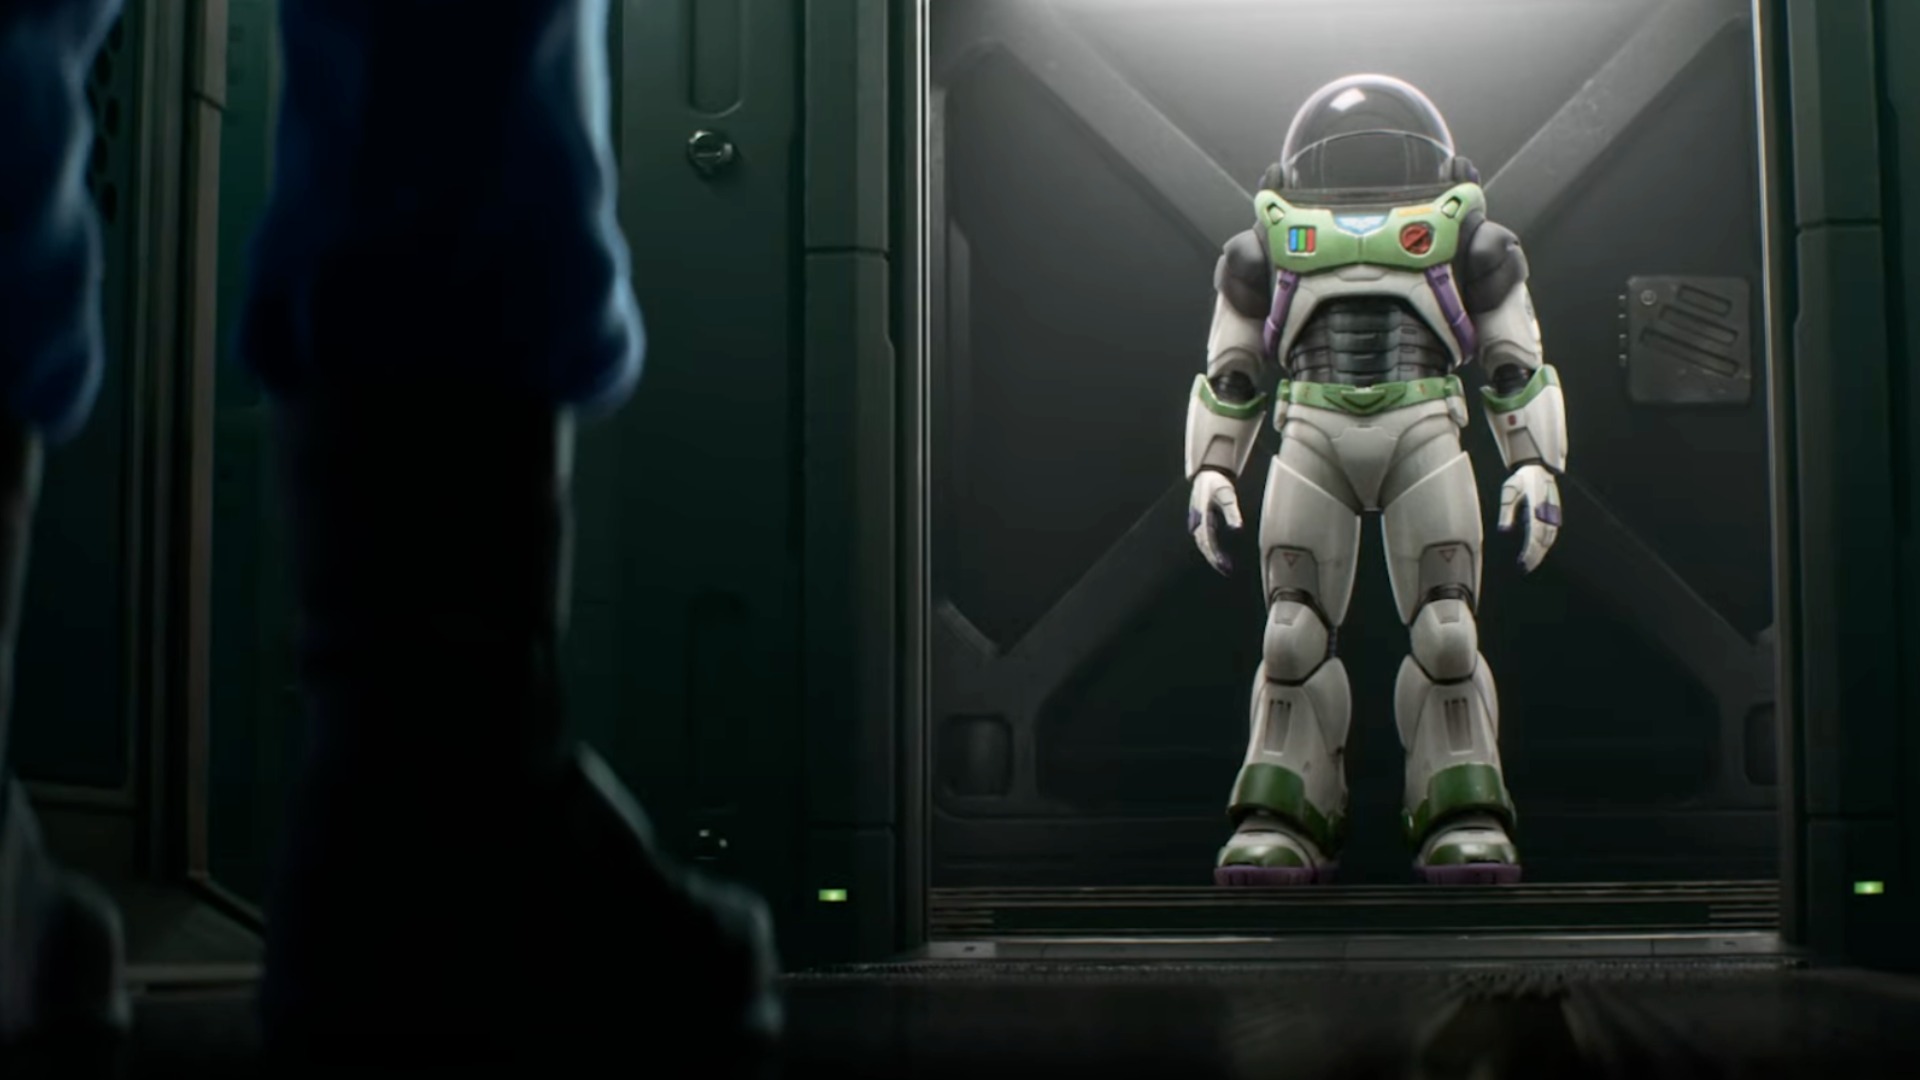 New Lightyear trailer debuts at Oscars 2022